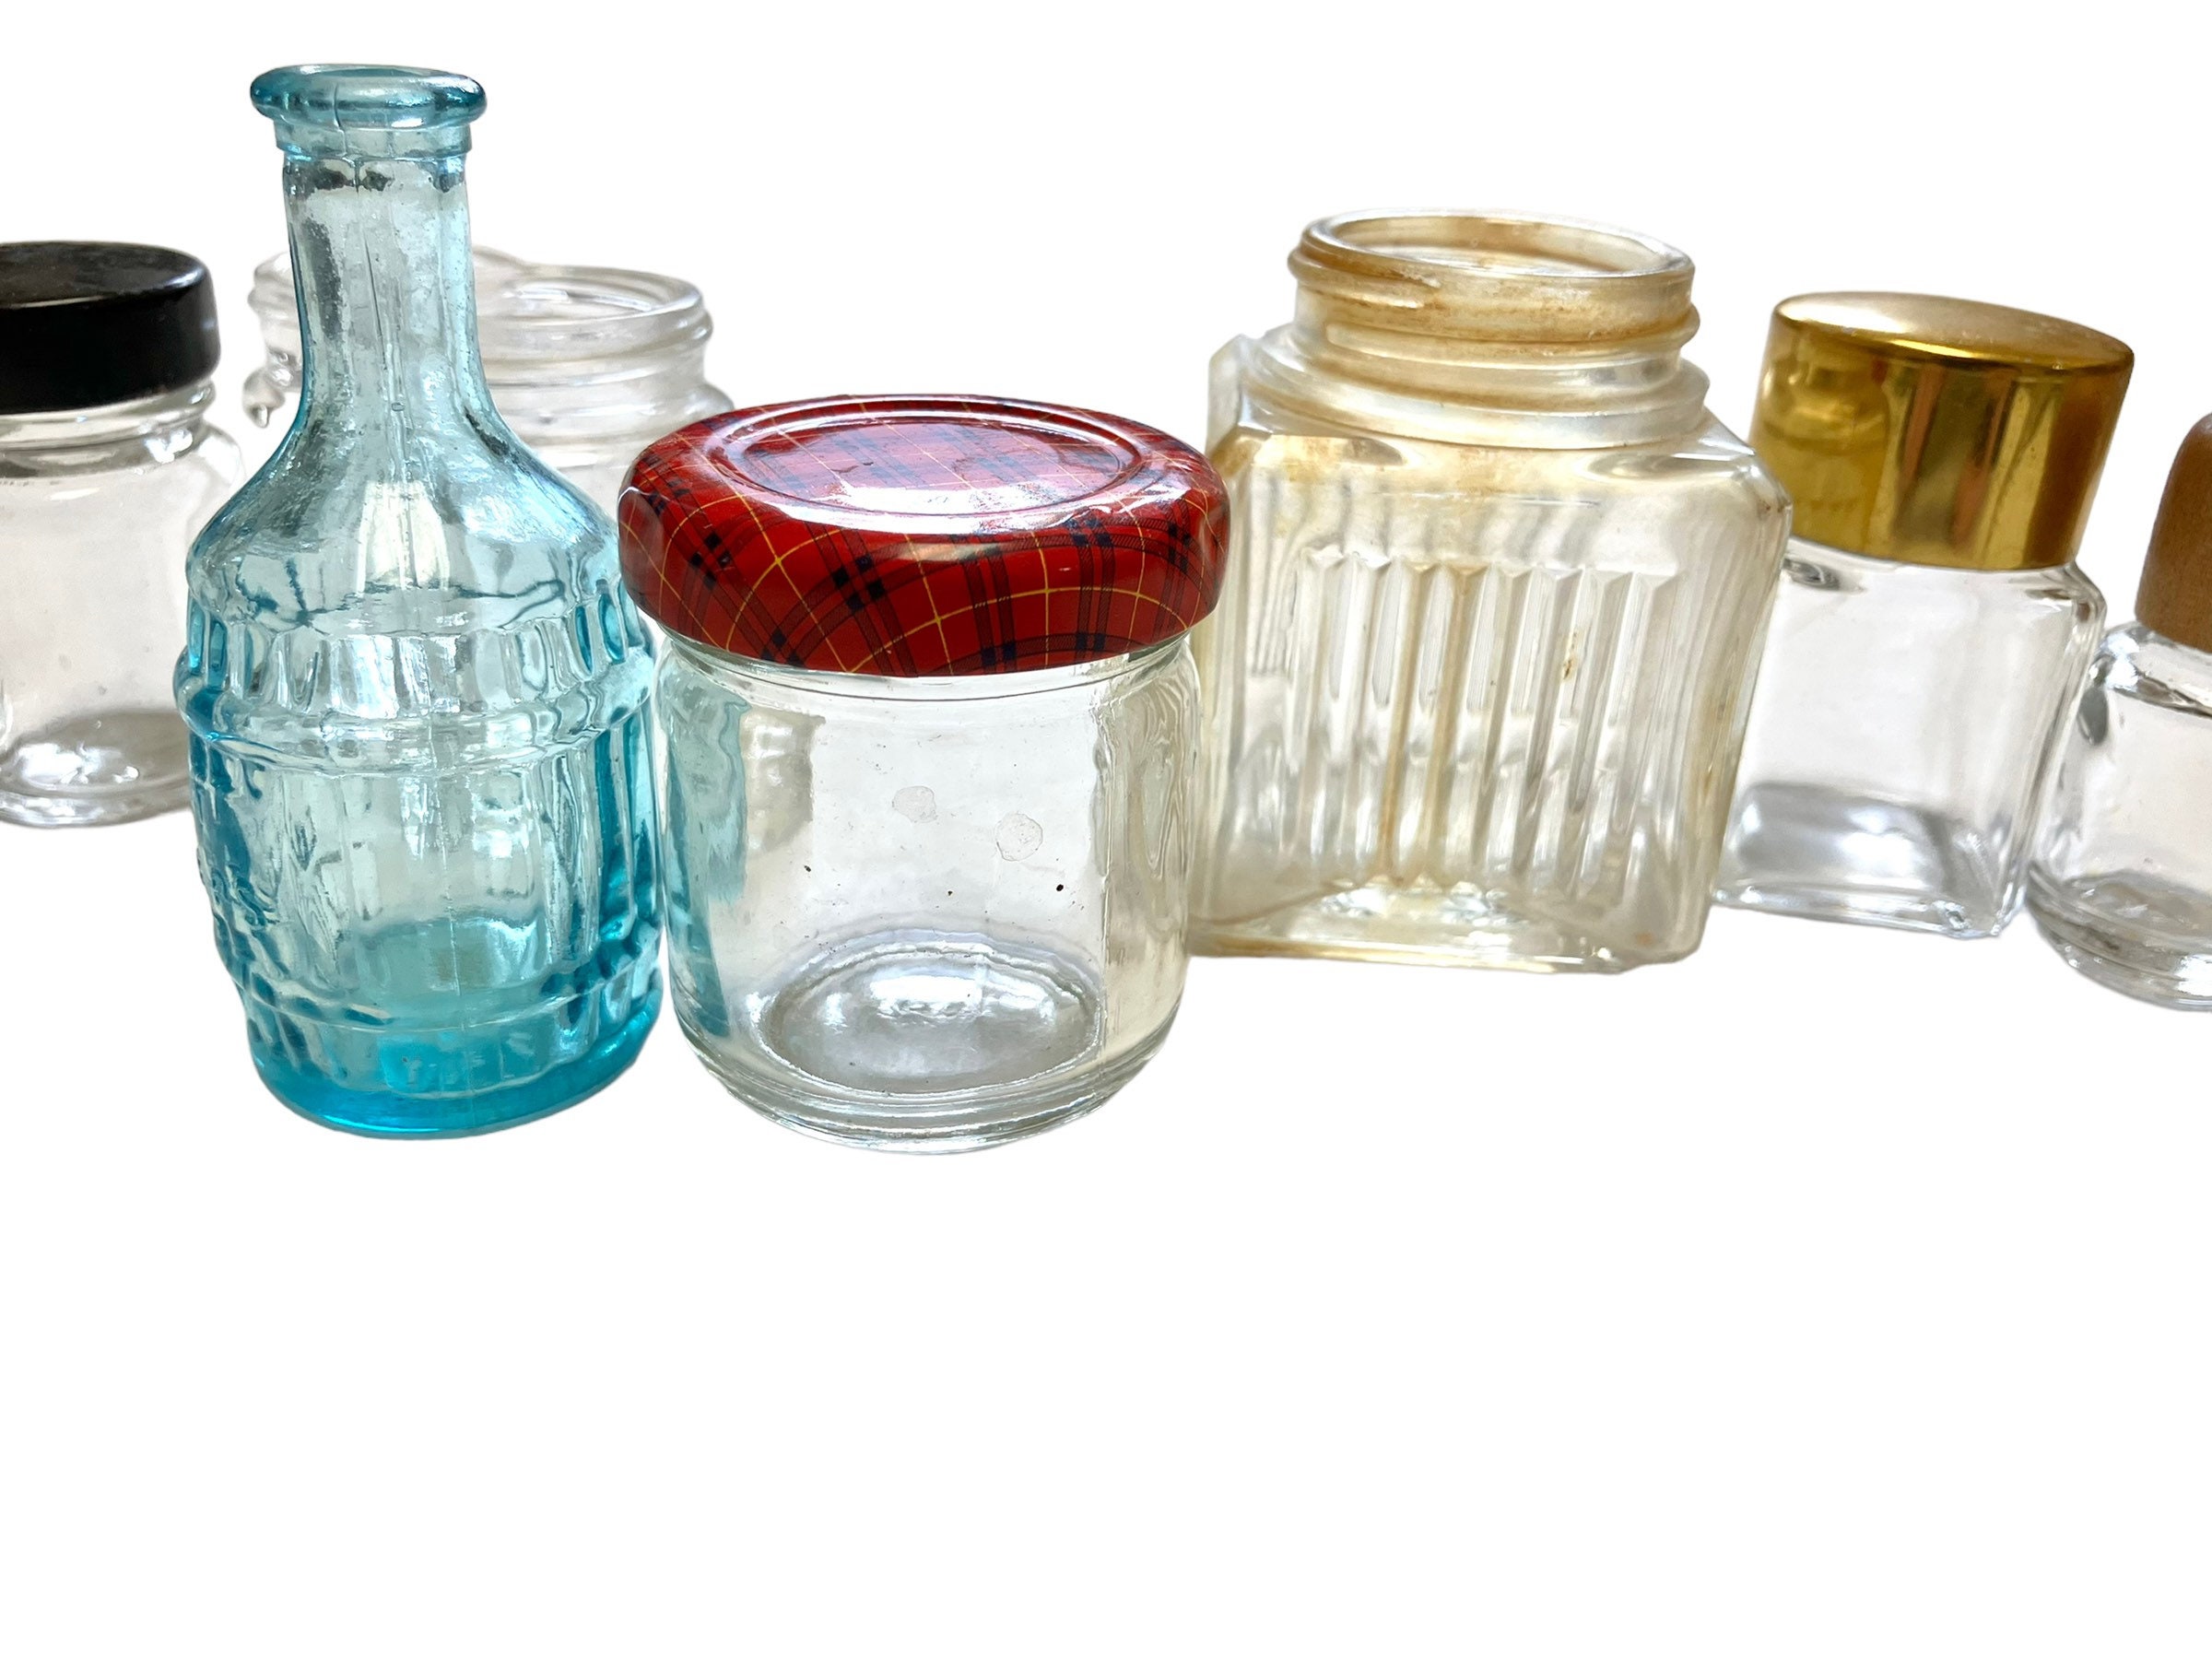 Small Clear Glass Bottles for Crafts 12 Vintage Empty Glass